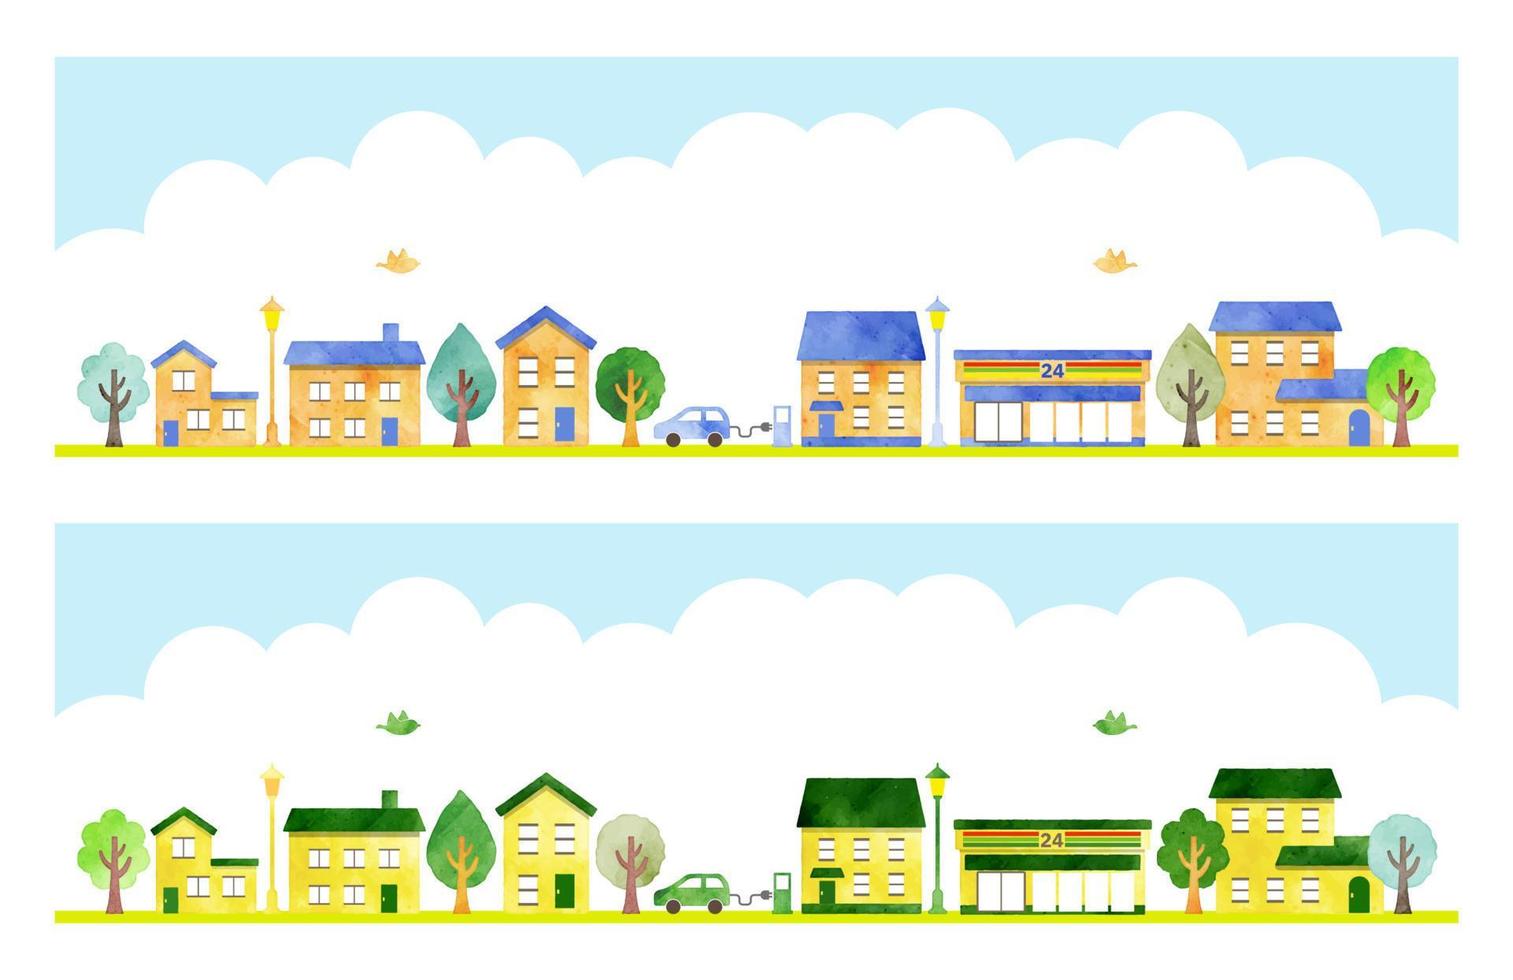 Set of buildings in cartoon style. Vector illustration isolated on white background.